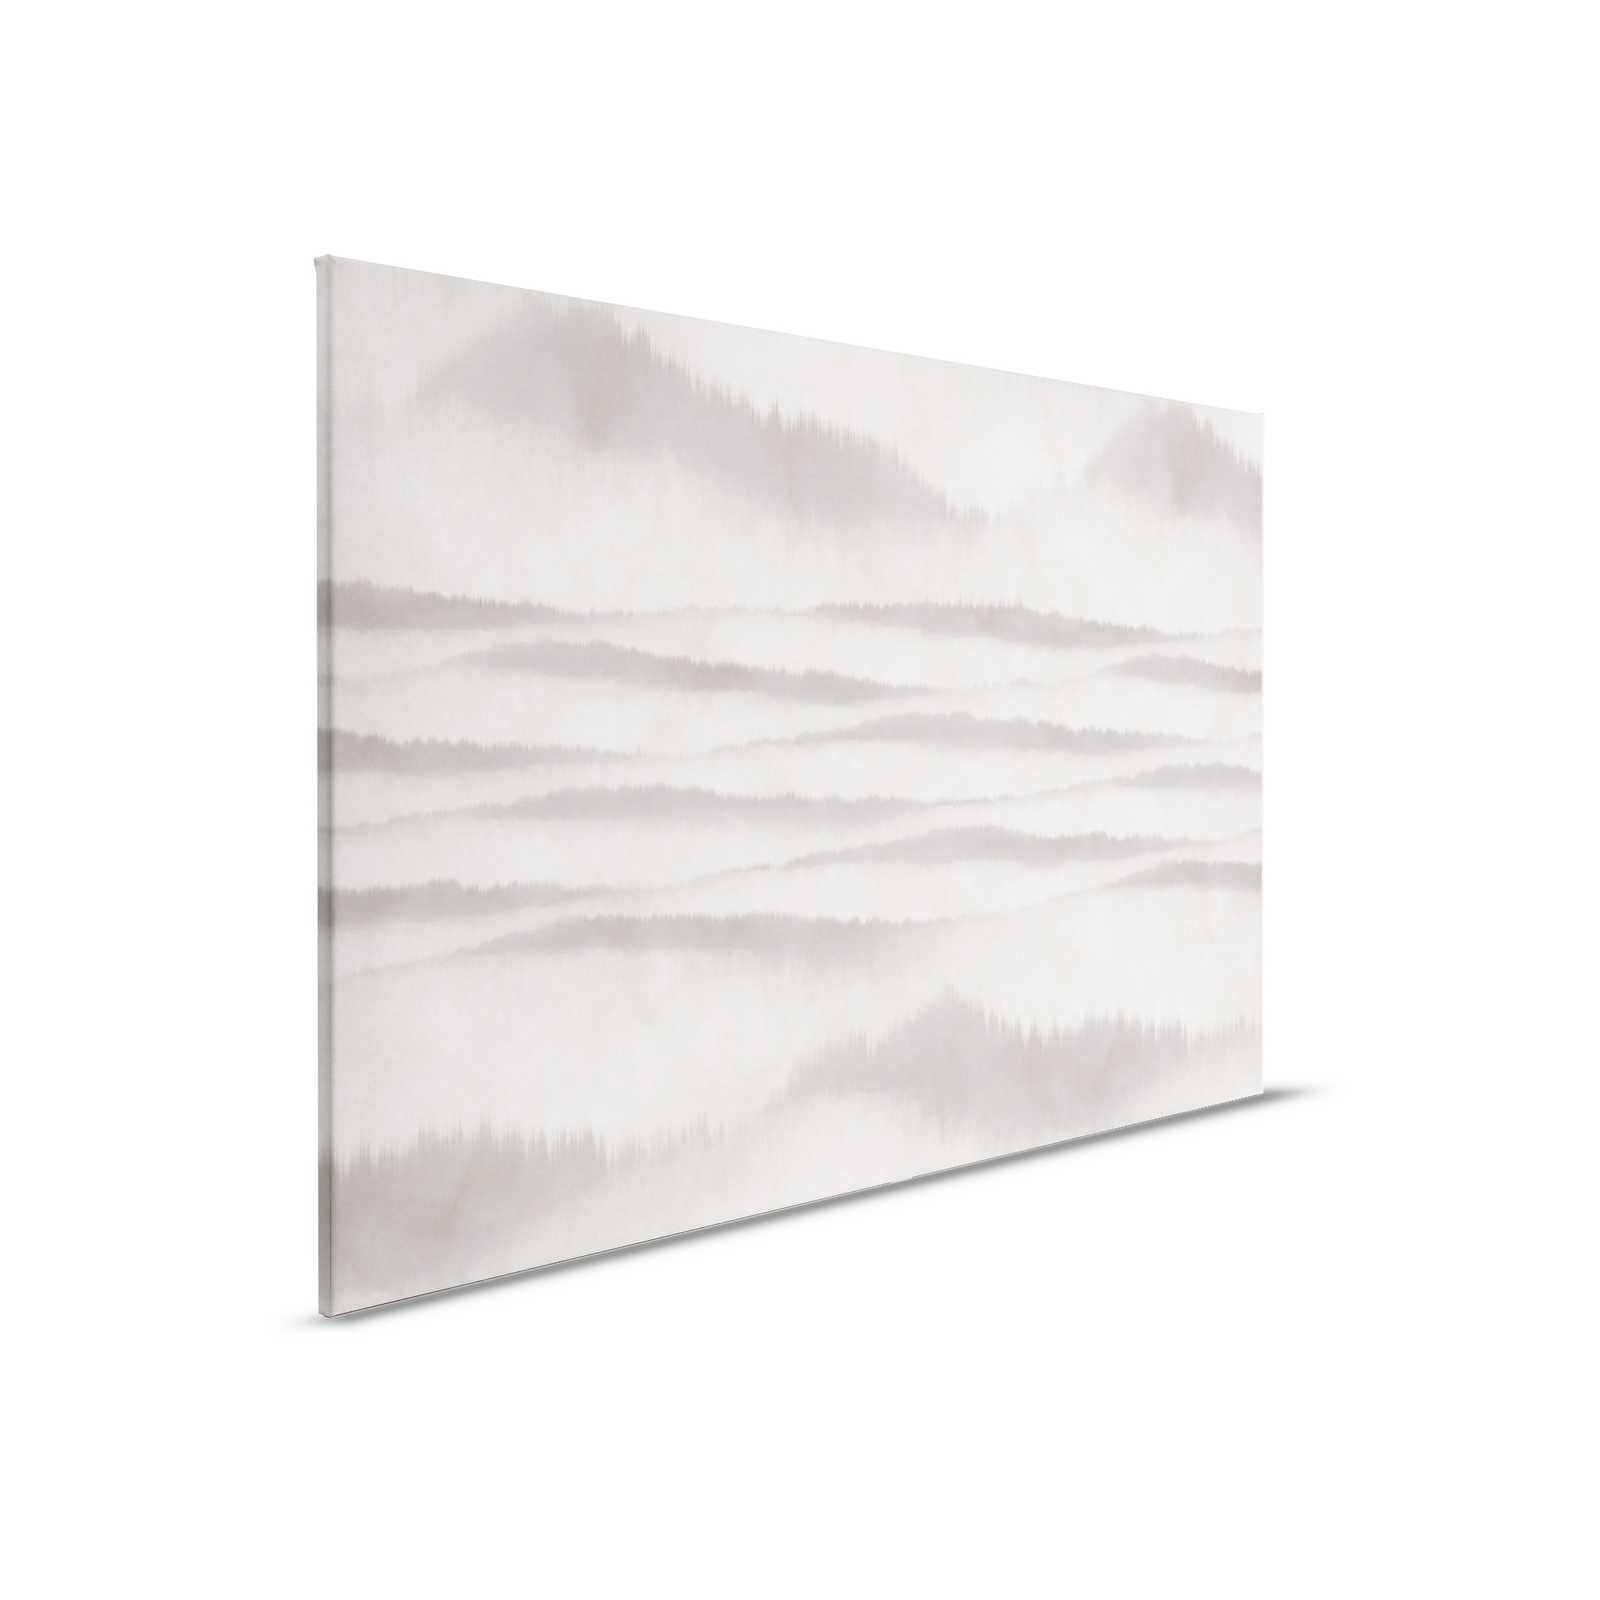         Canvas painting abstract pattern waves | white, grey - 0,90 m x 0,60 m
    